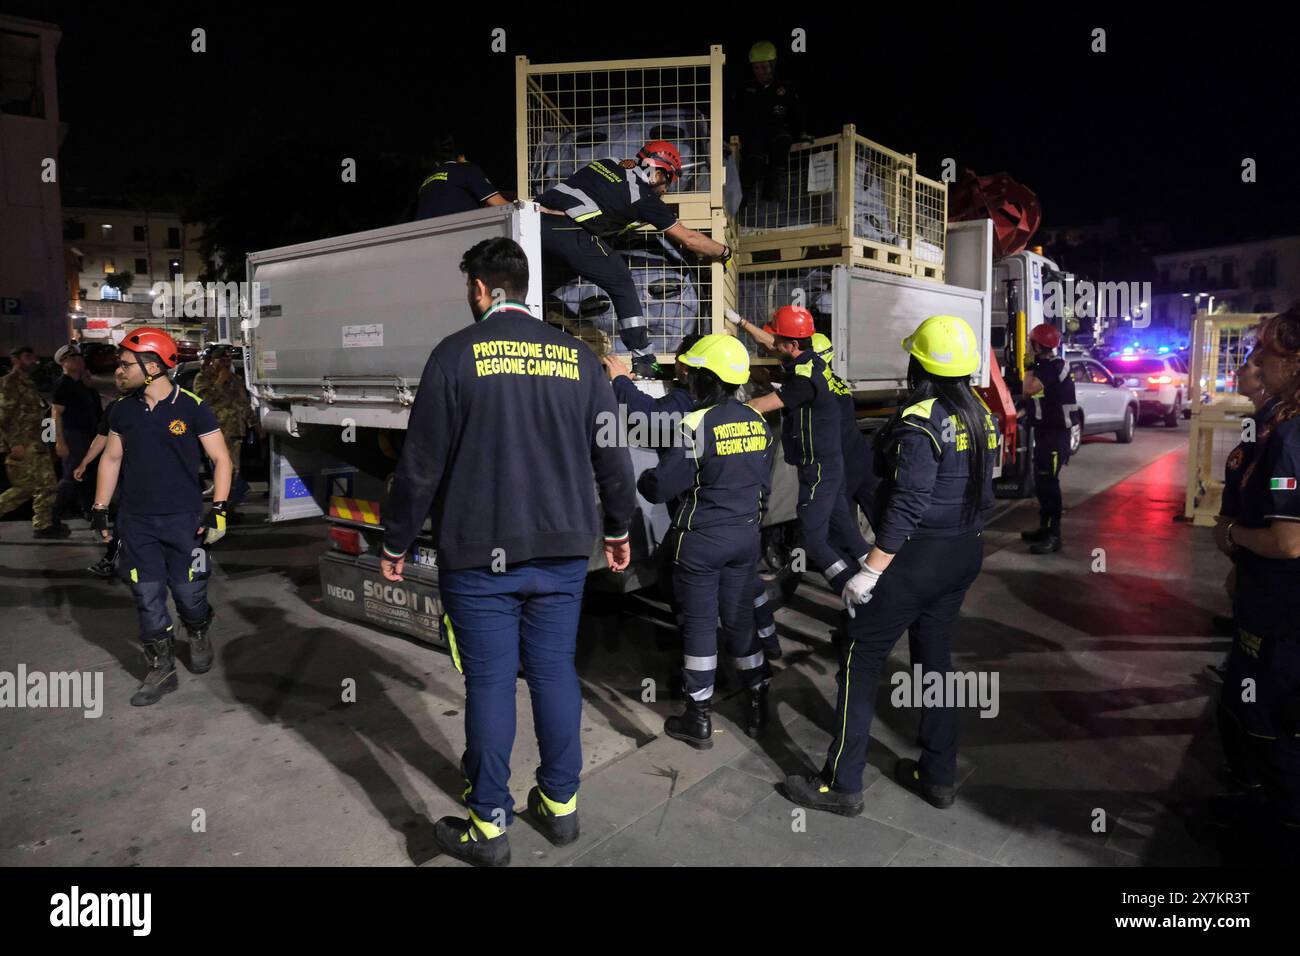 Italy: Campi Flegrei, bradisismo Campania s civil protection set up a tensile structure at the port of pozzuoli for people who are not confident about returning to their homes after the earthquake tremors, near Naples, southern Italy, 20 May 2024. The tremor that occurred at 8.10pm with epicentre in the Campi Flegrei was of magnitude 4.4. This was reported by the National Institute of Geophysics and Volcanology, according to which the depth of the quake was three kilometres. ABP01660 Copyright: xAntonioxBalascox Stock Photo